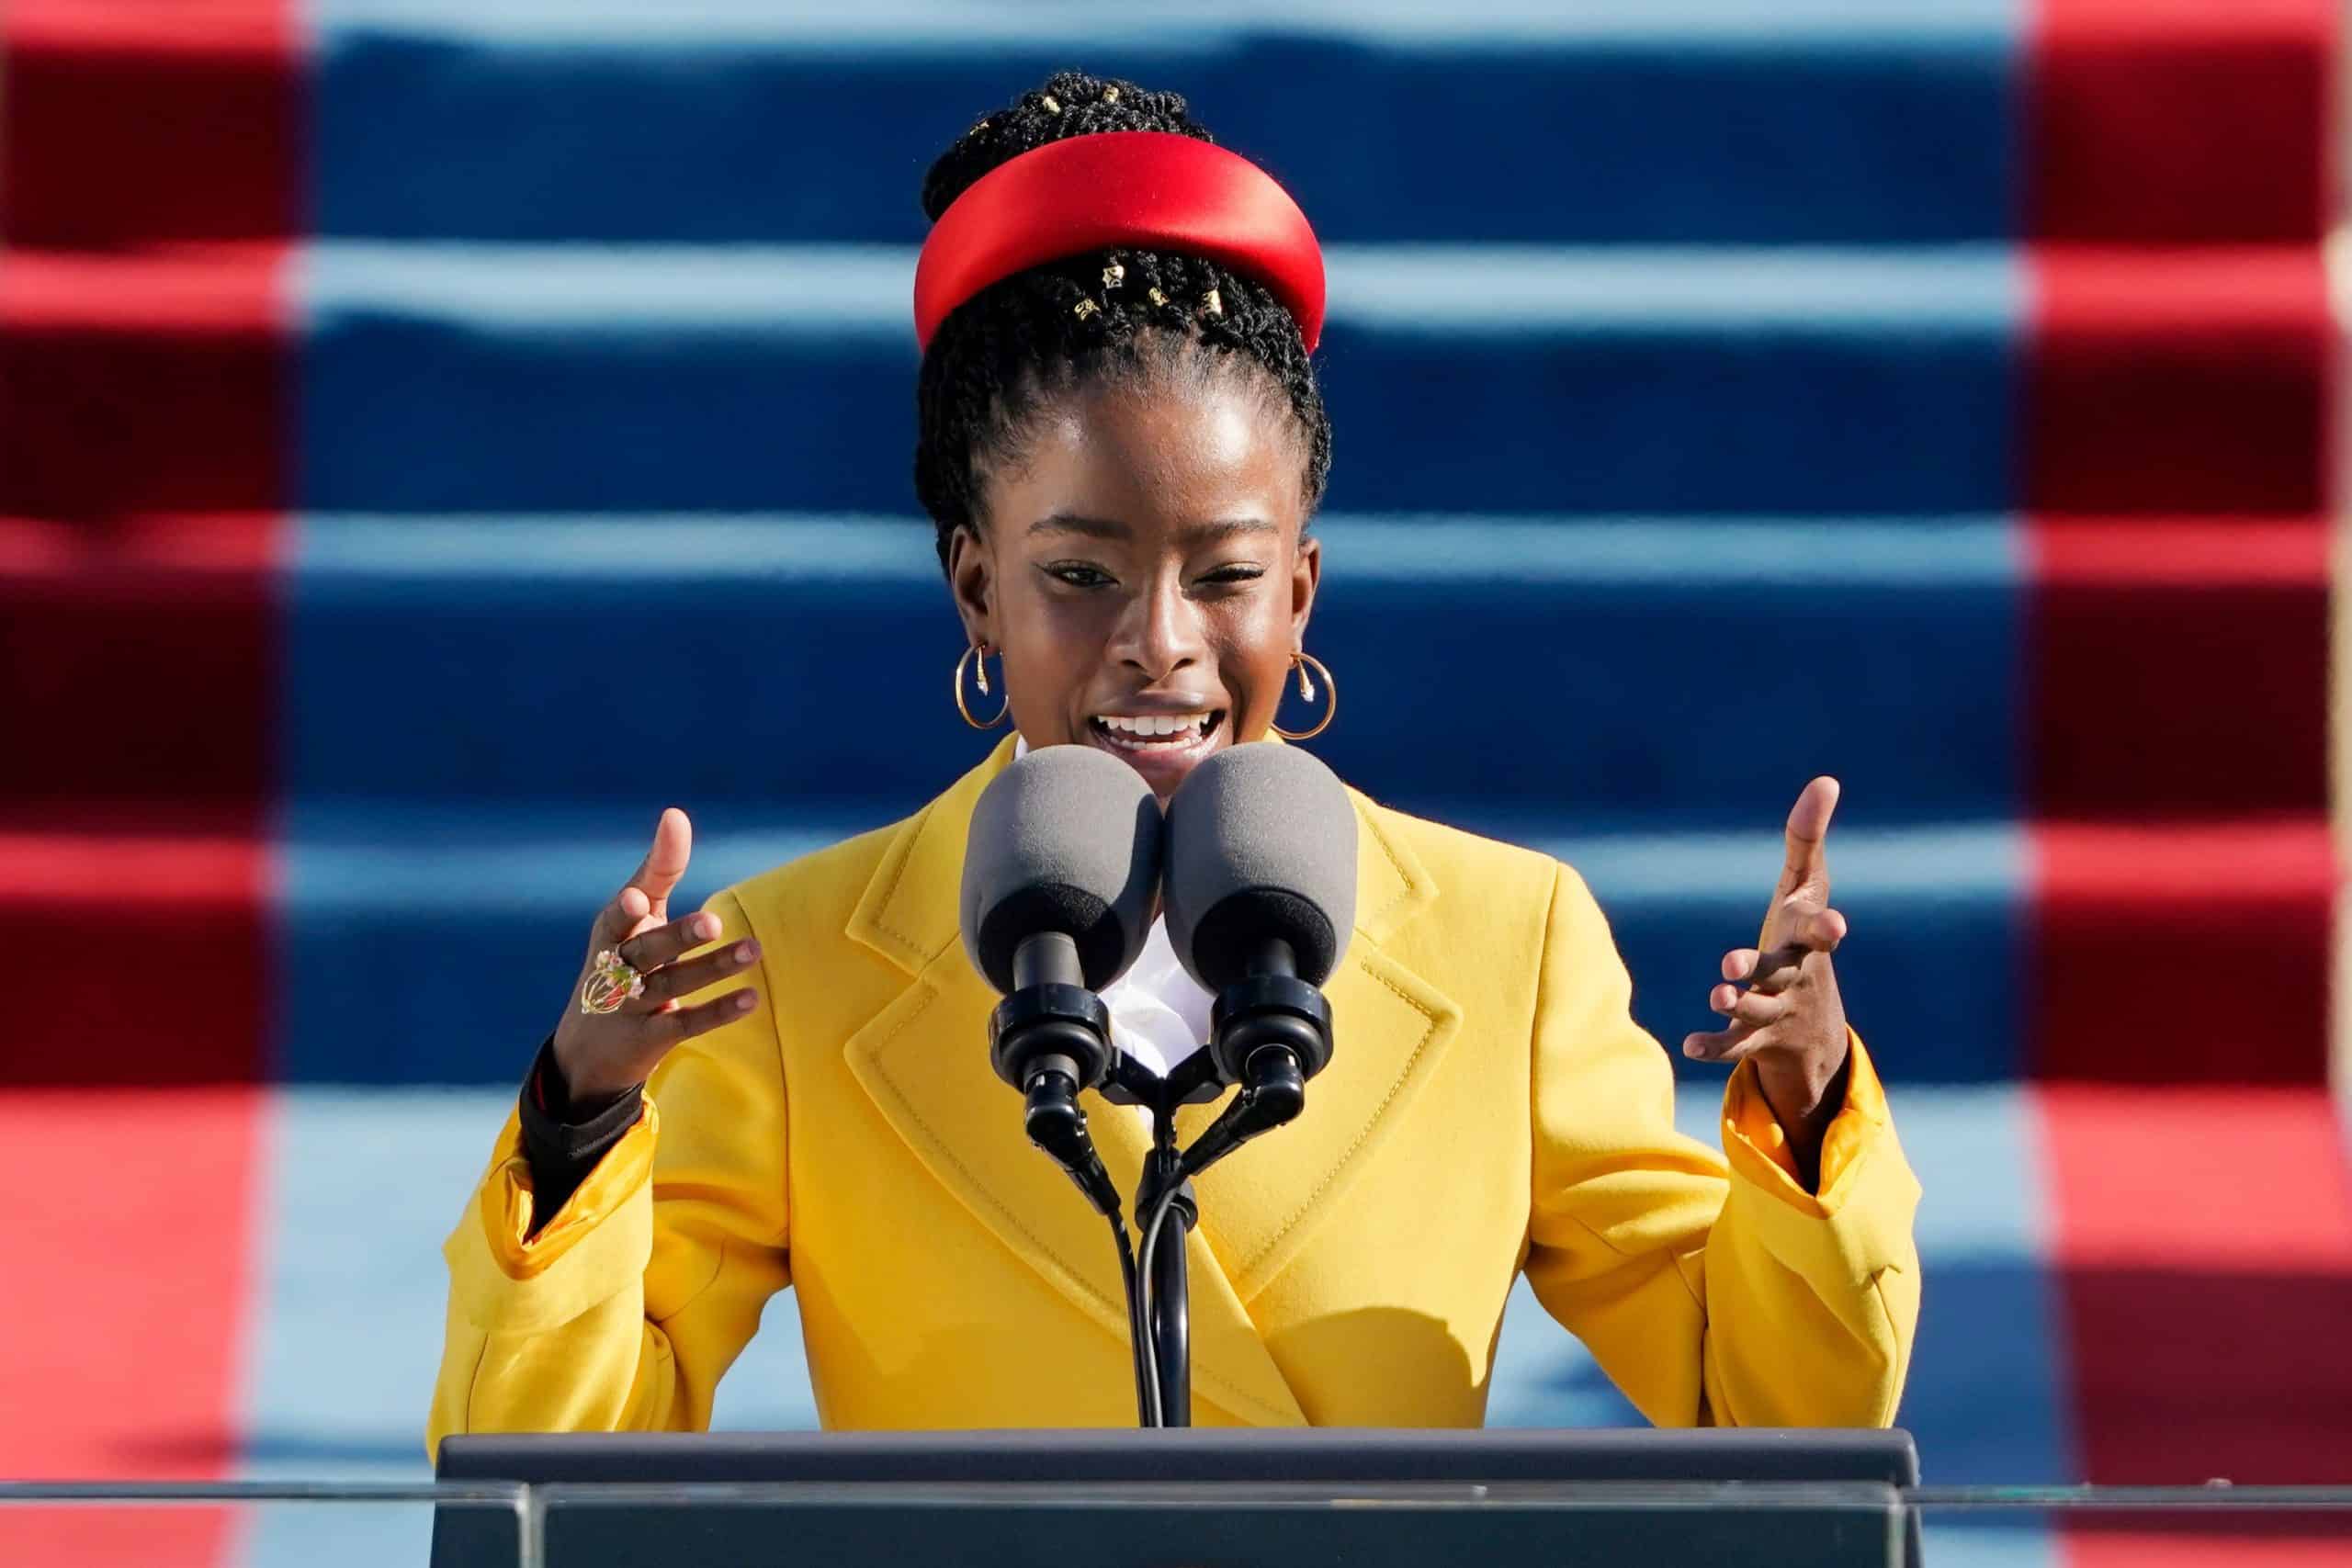 Watch – Reactions as Poet Amanda Gorman delivers inspirational inauguration performance